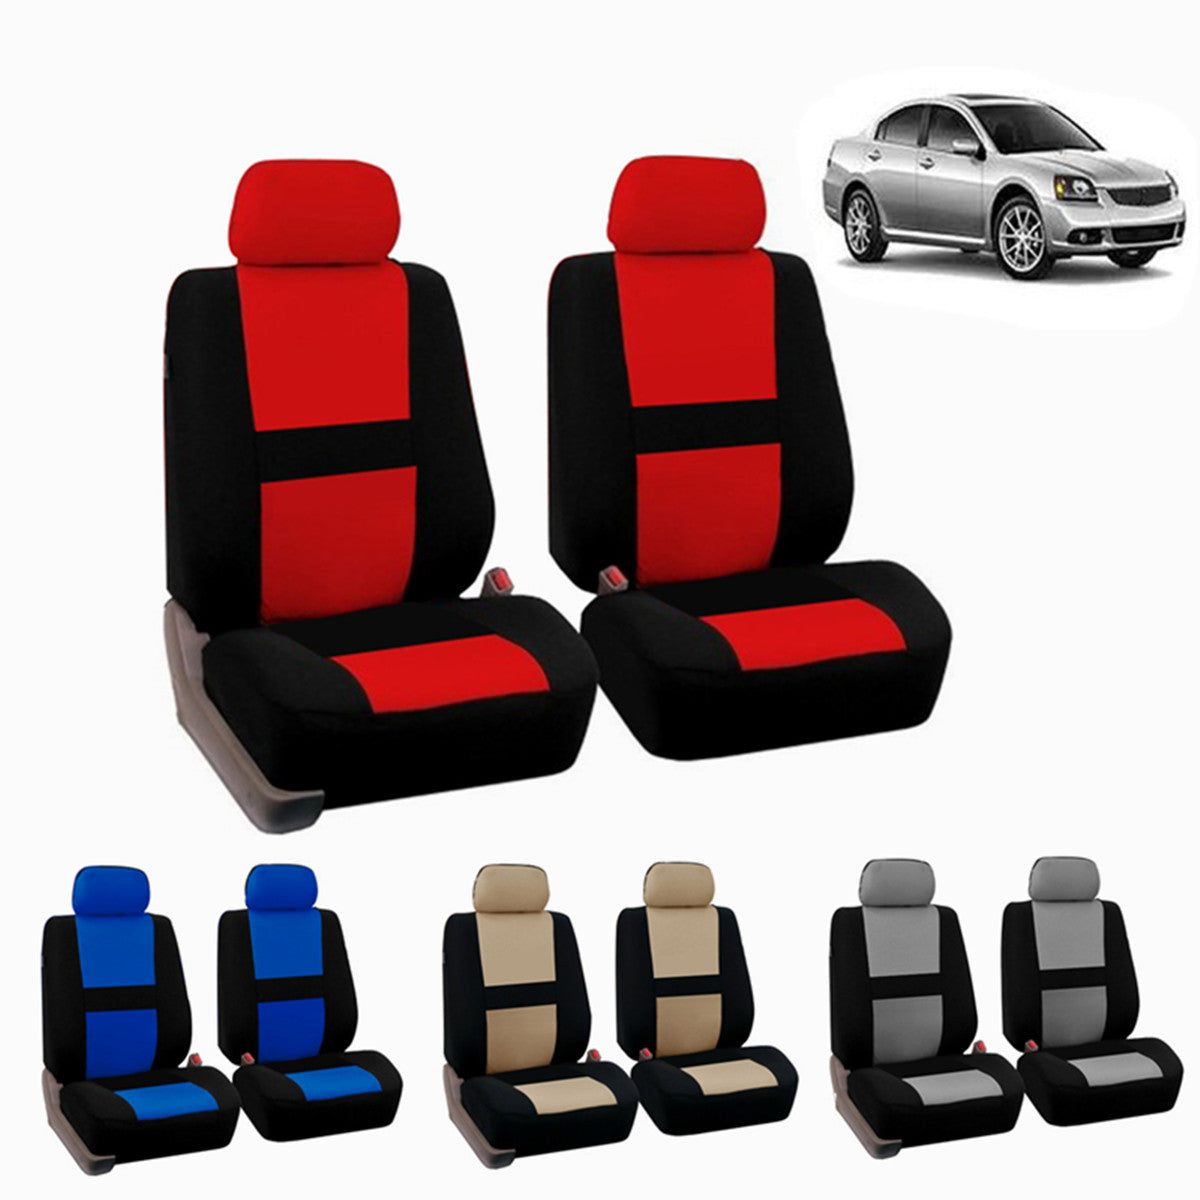 Full Set Car Seat Cover Polyester For Auto Truck SUV 2 Heads Durable Comfortable Breathable 3D Air Mesh Fabric - Auto GoShop